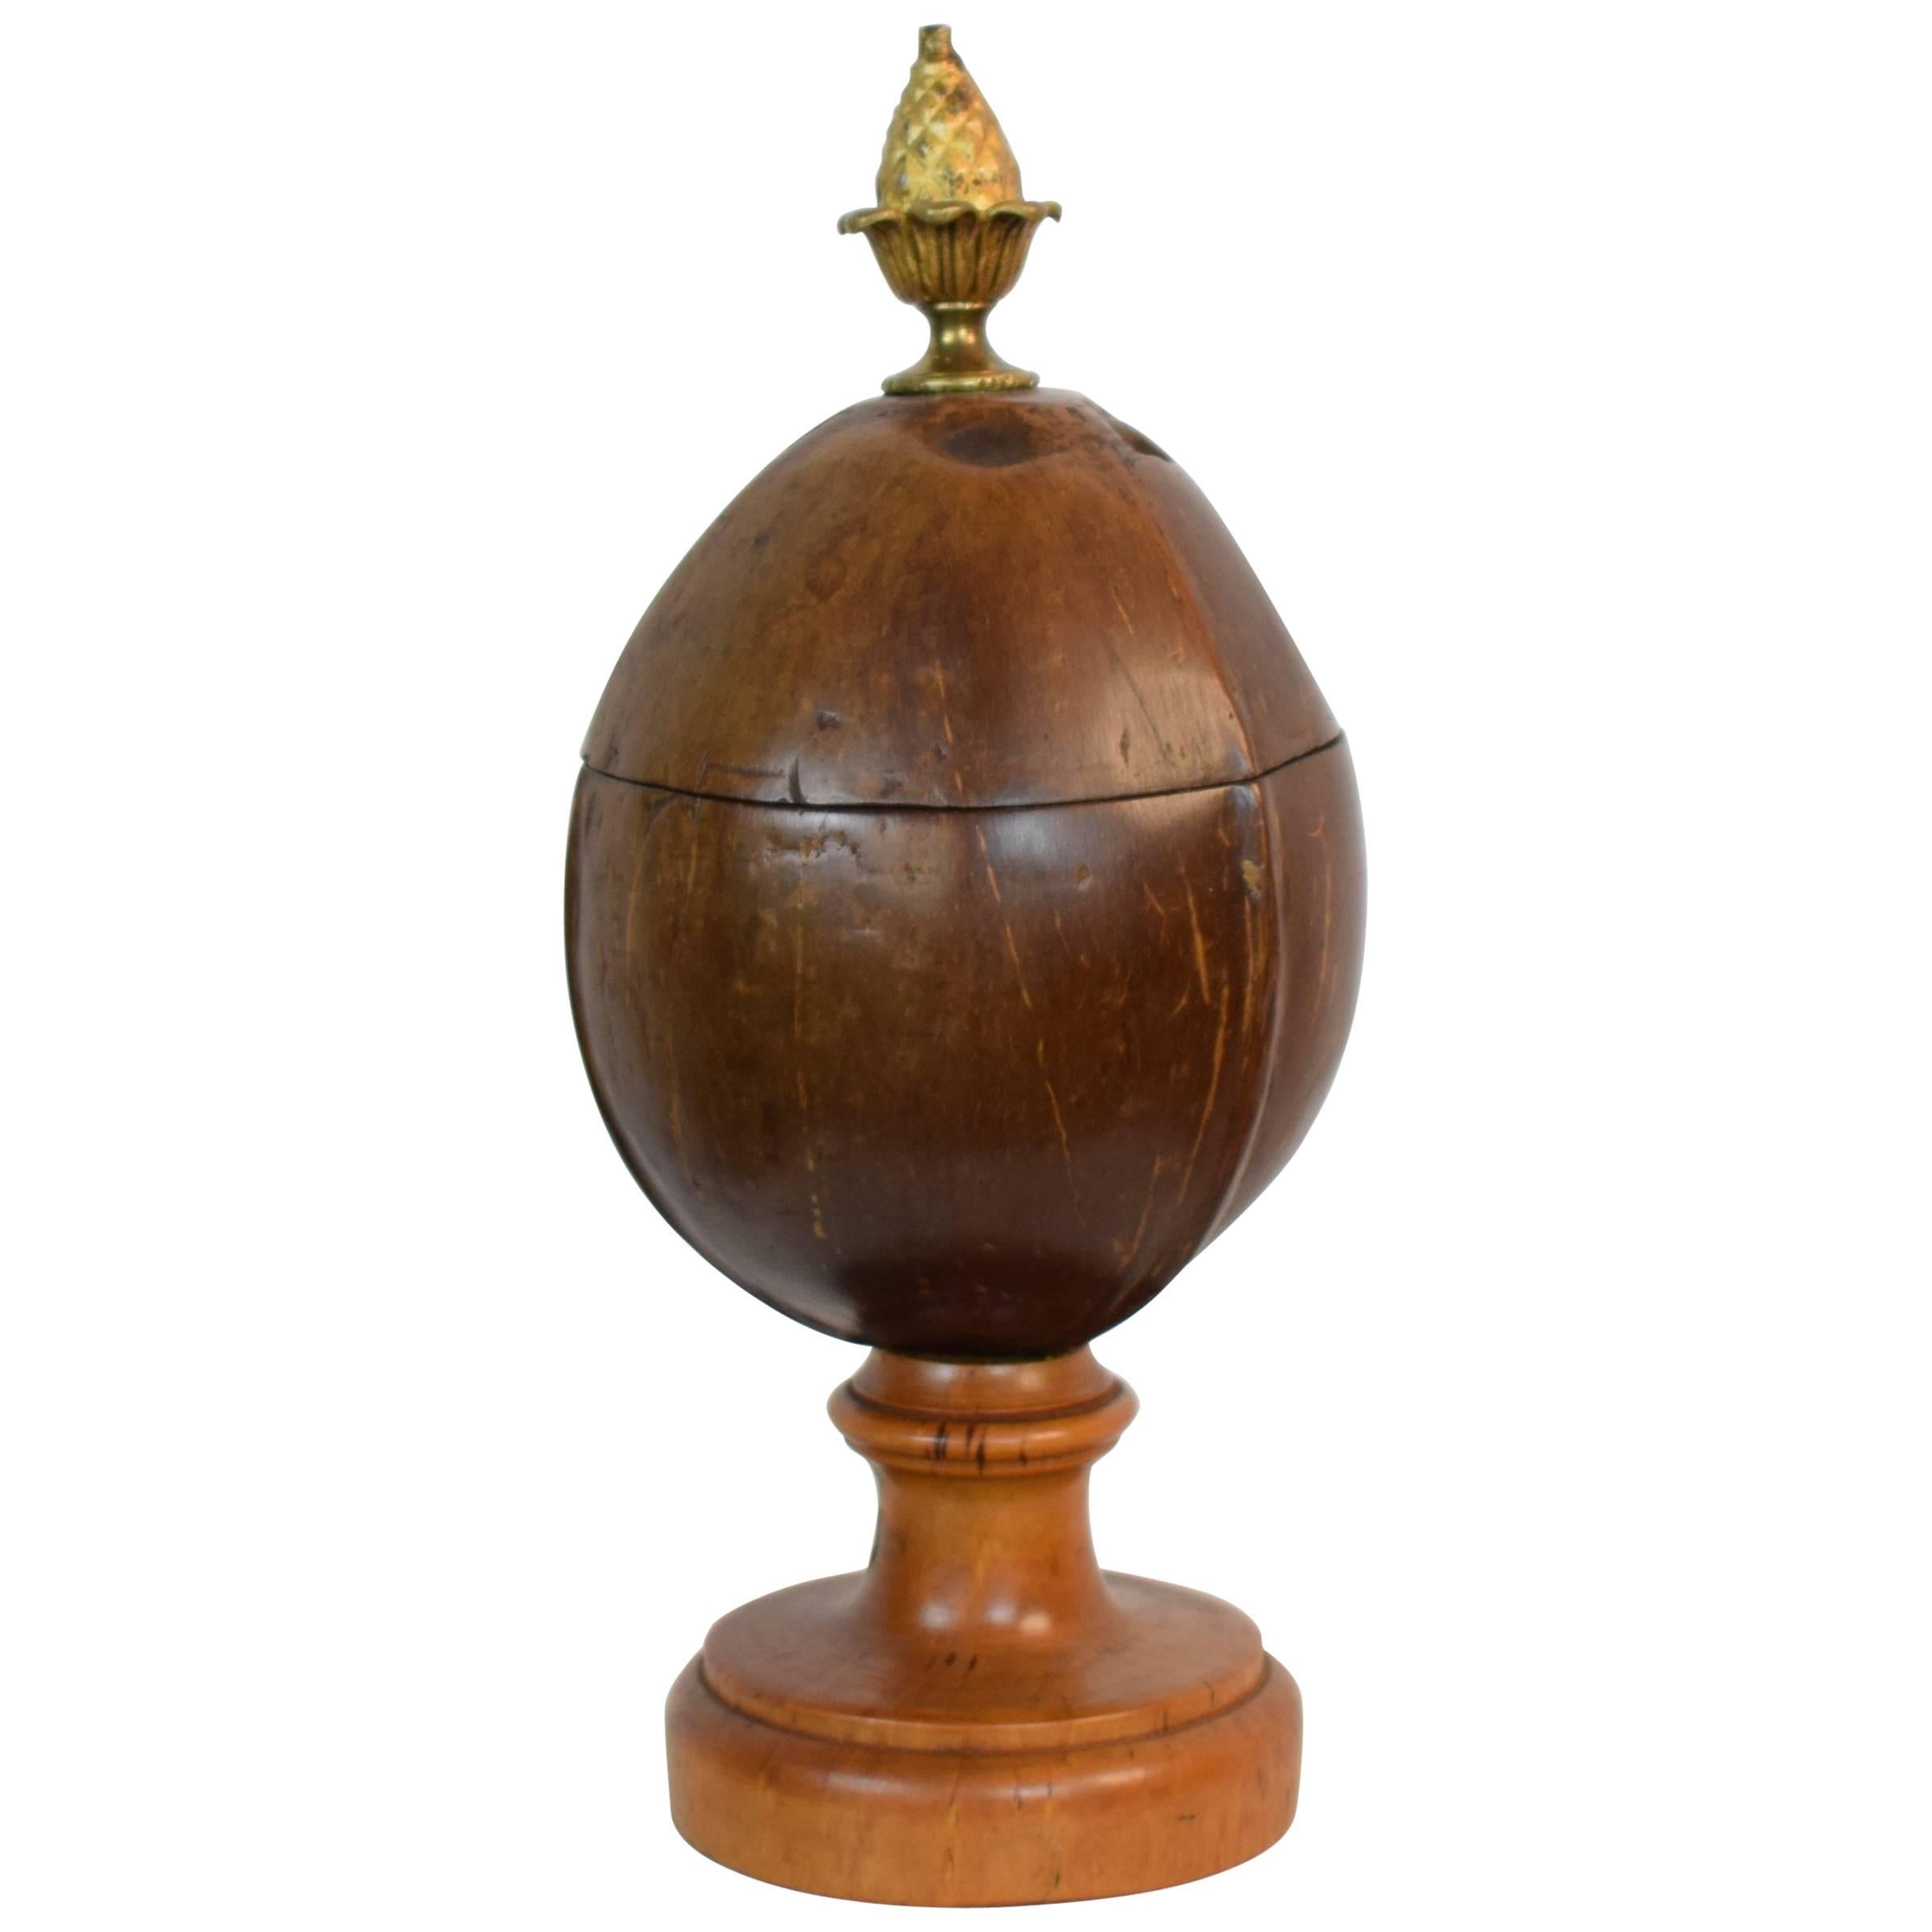 Early 19th Century, German Coconut Box on a Turned Wooden Stand